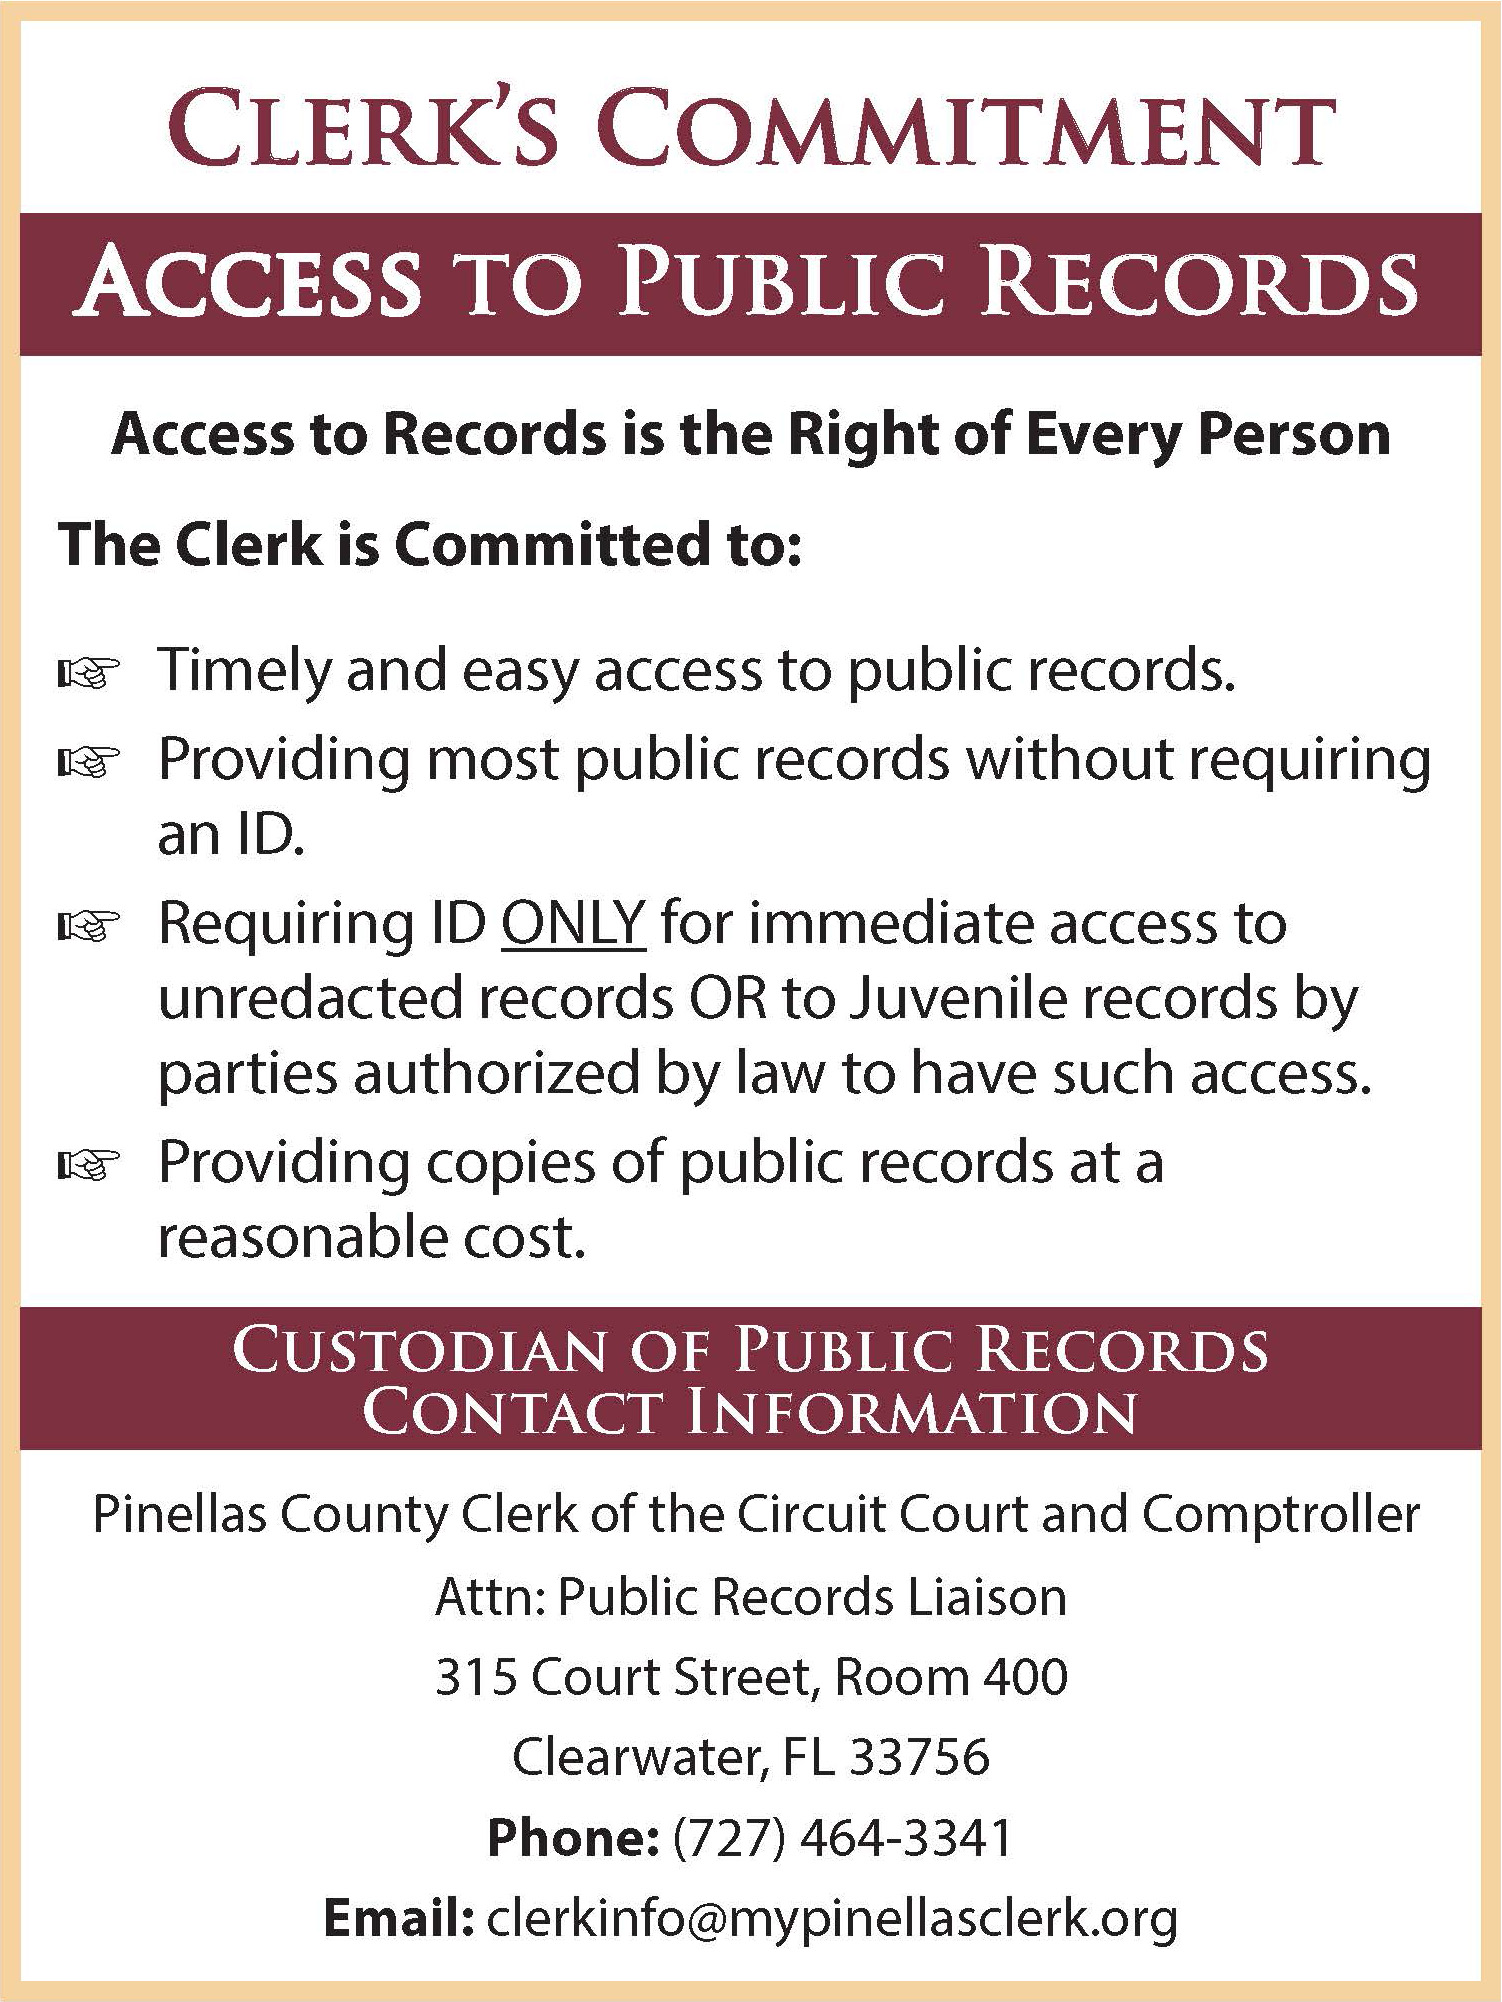 Clerk's Commitment: Access to Public Records